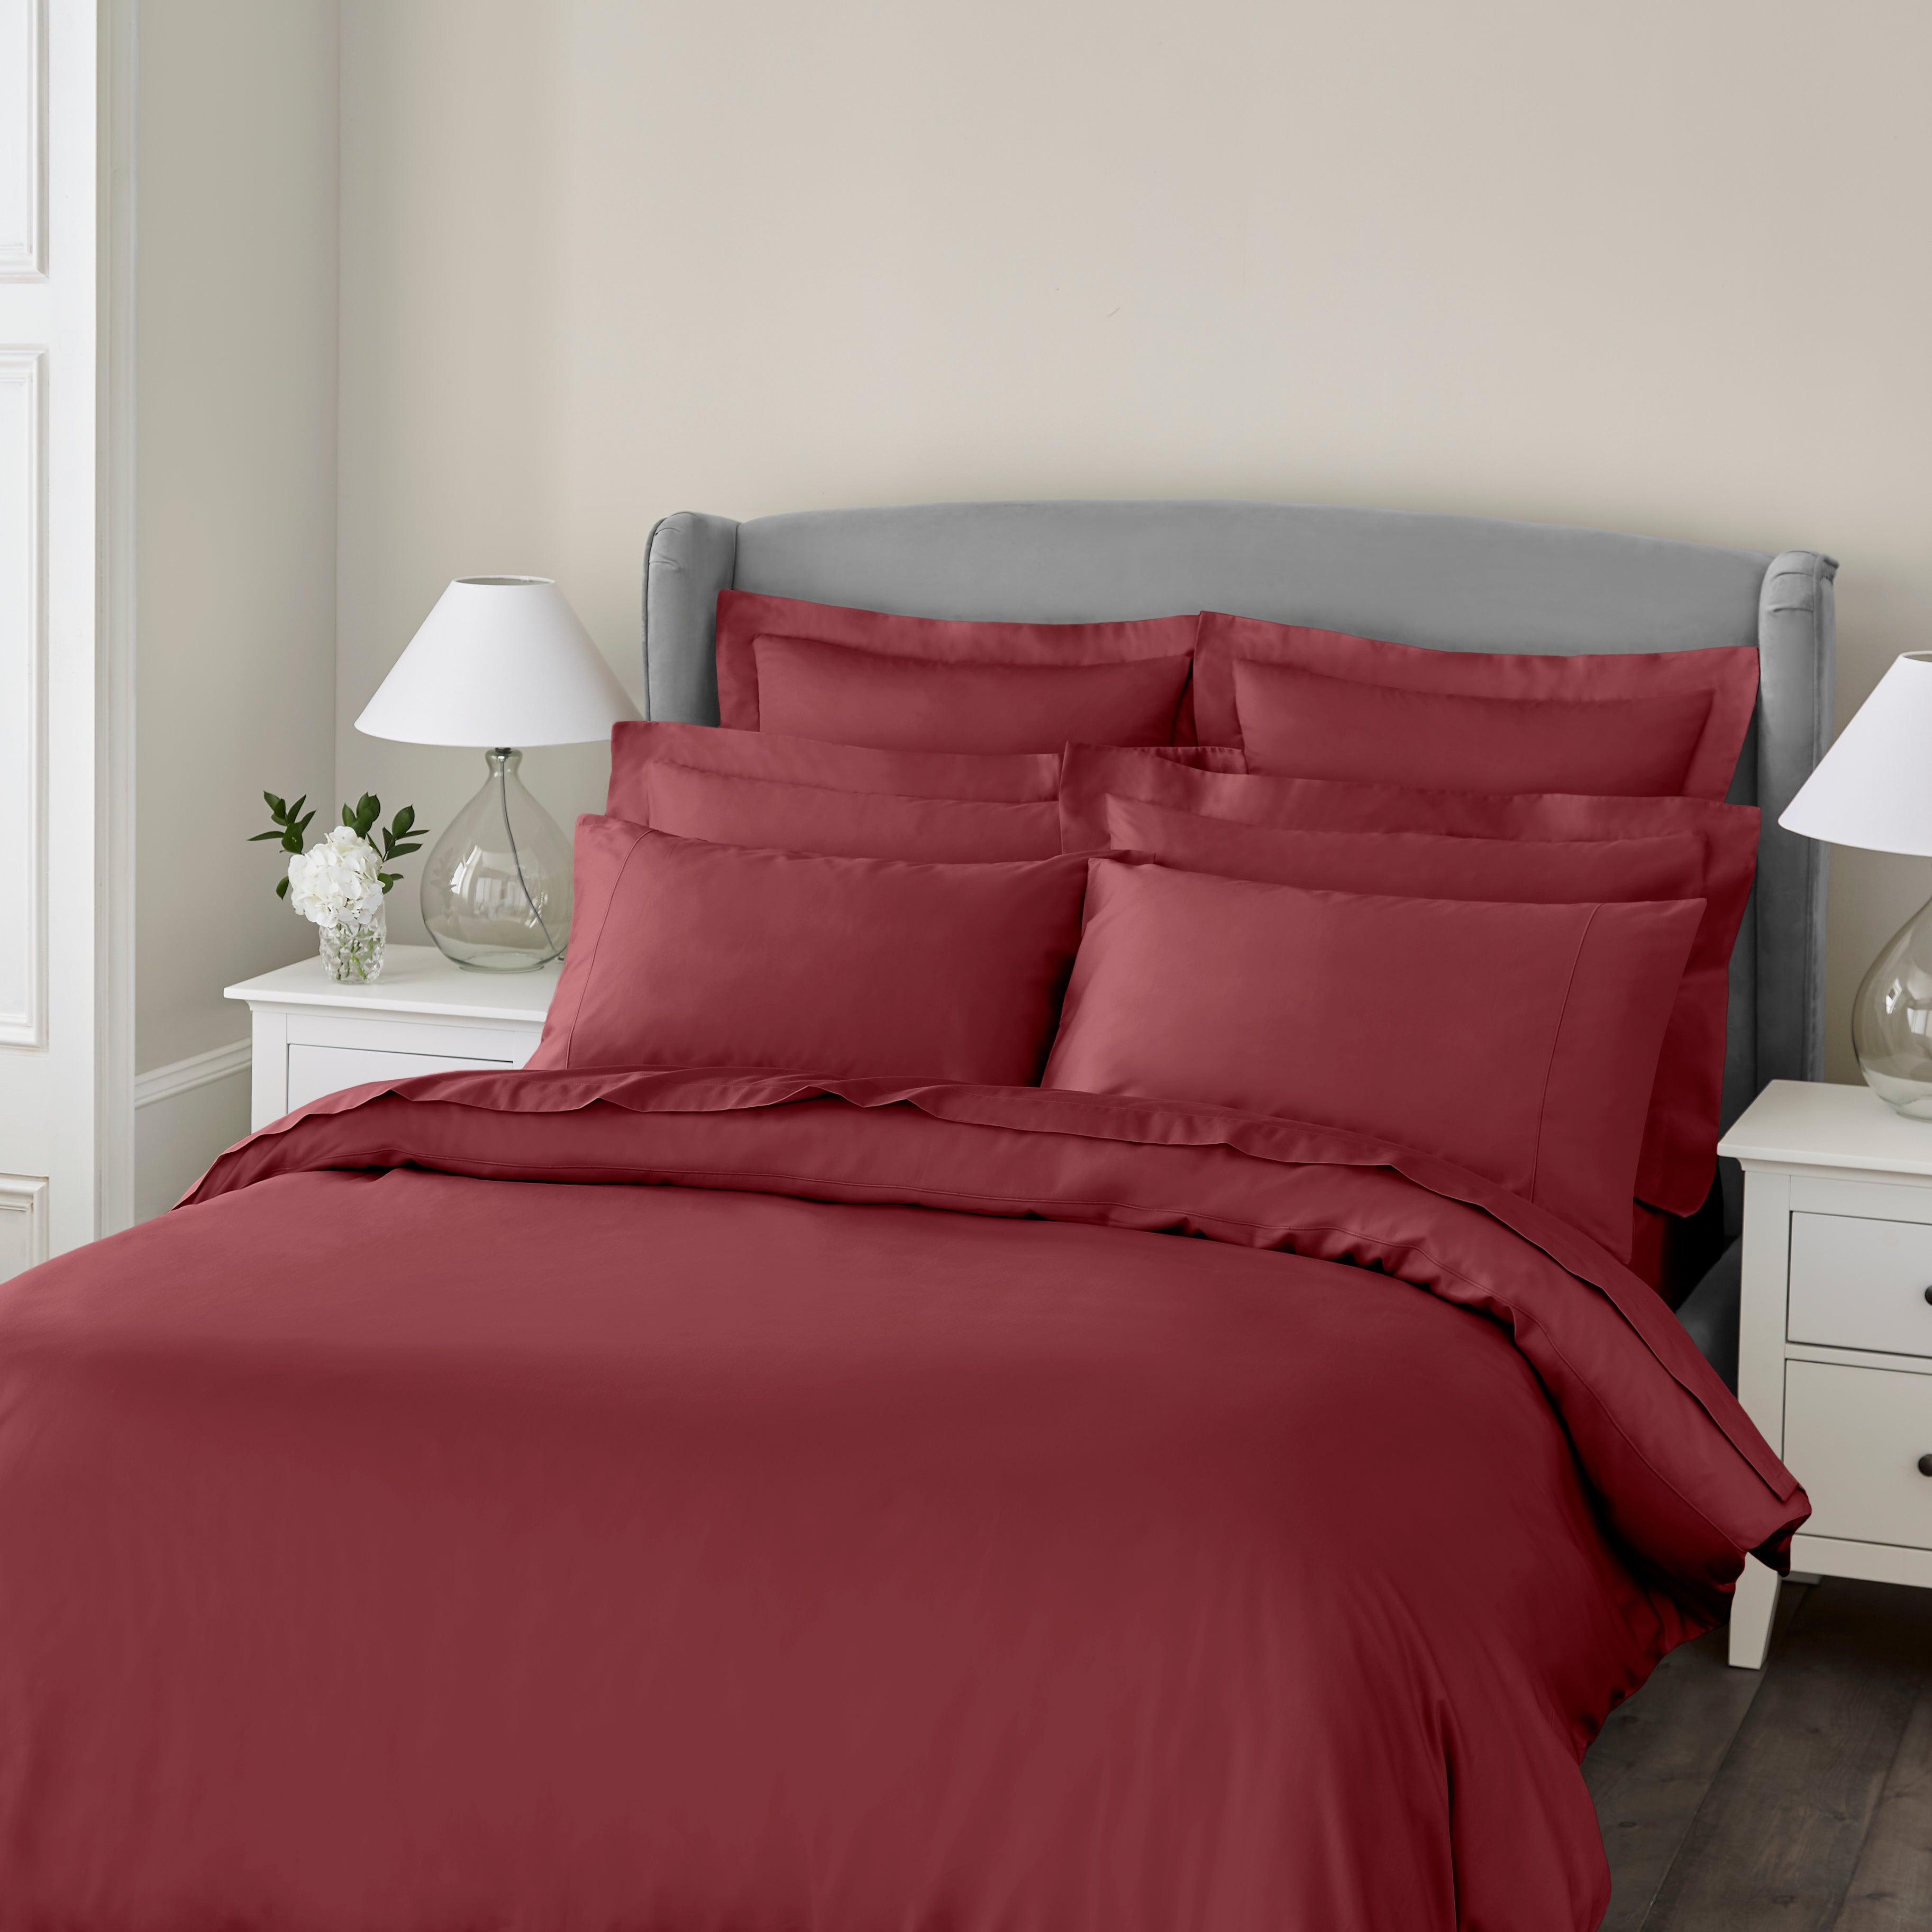 Image of Dorma Egyptian Cotton 400 Thread Count Percale Duvet Cover Red Red